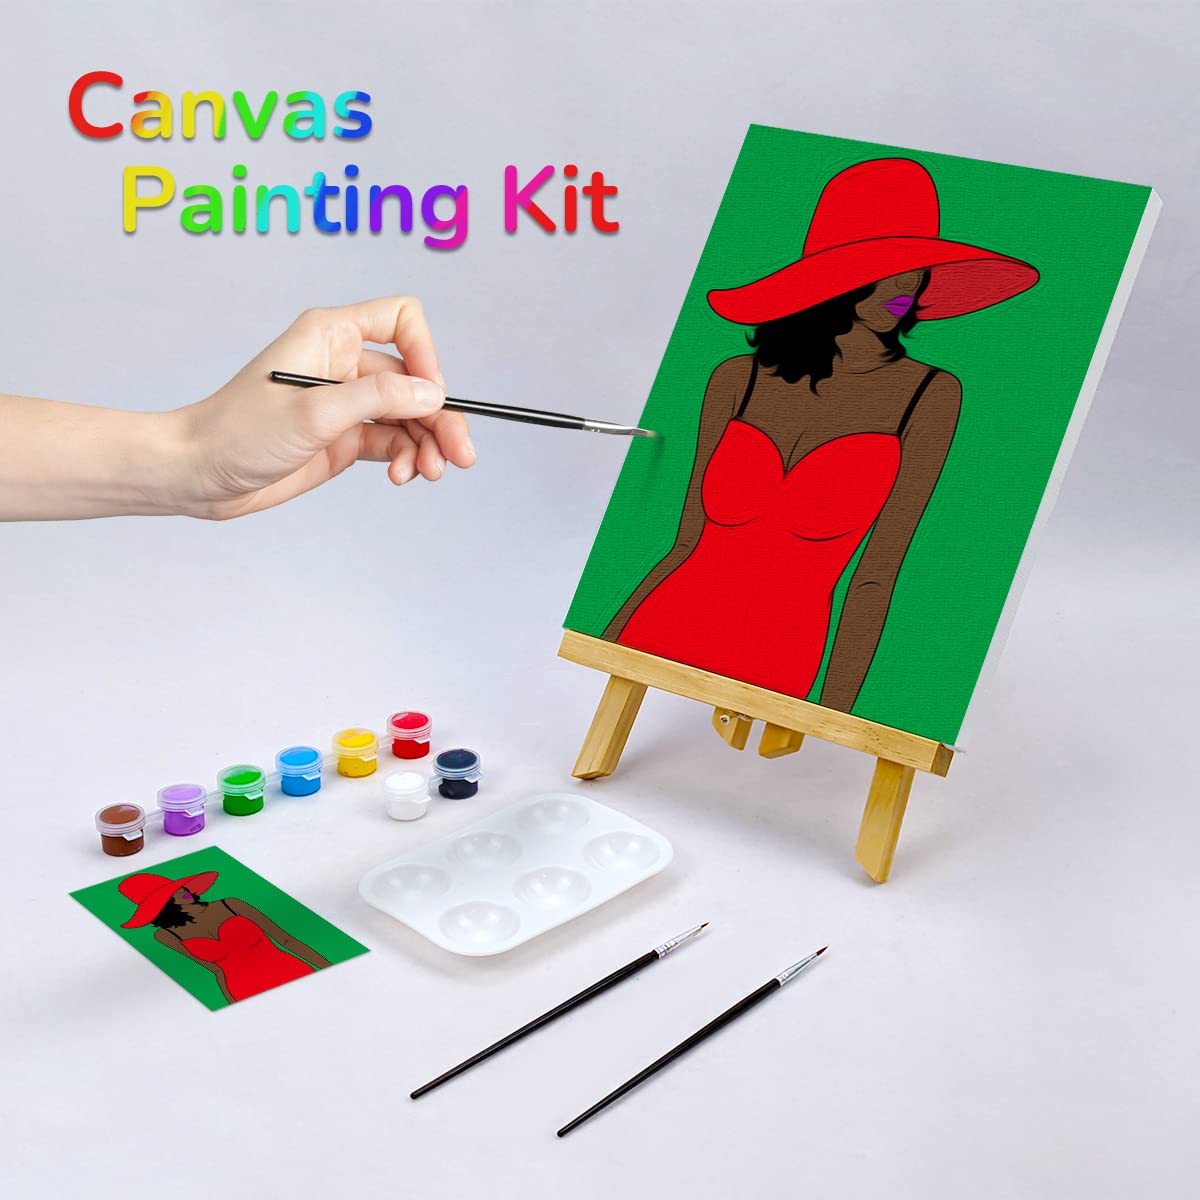 Ladies Paint Party Kits Pre Drawn Canvas Paint and Sip for Adults